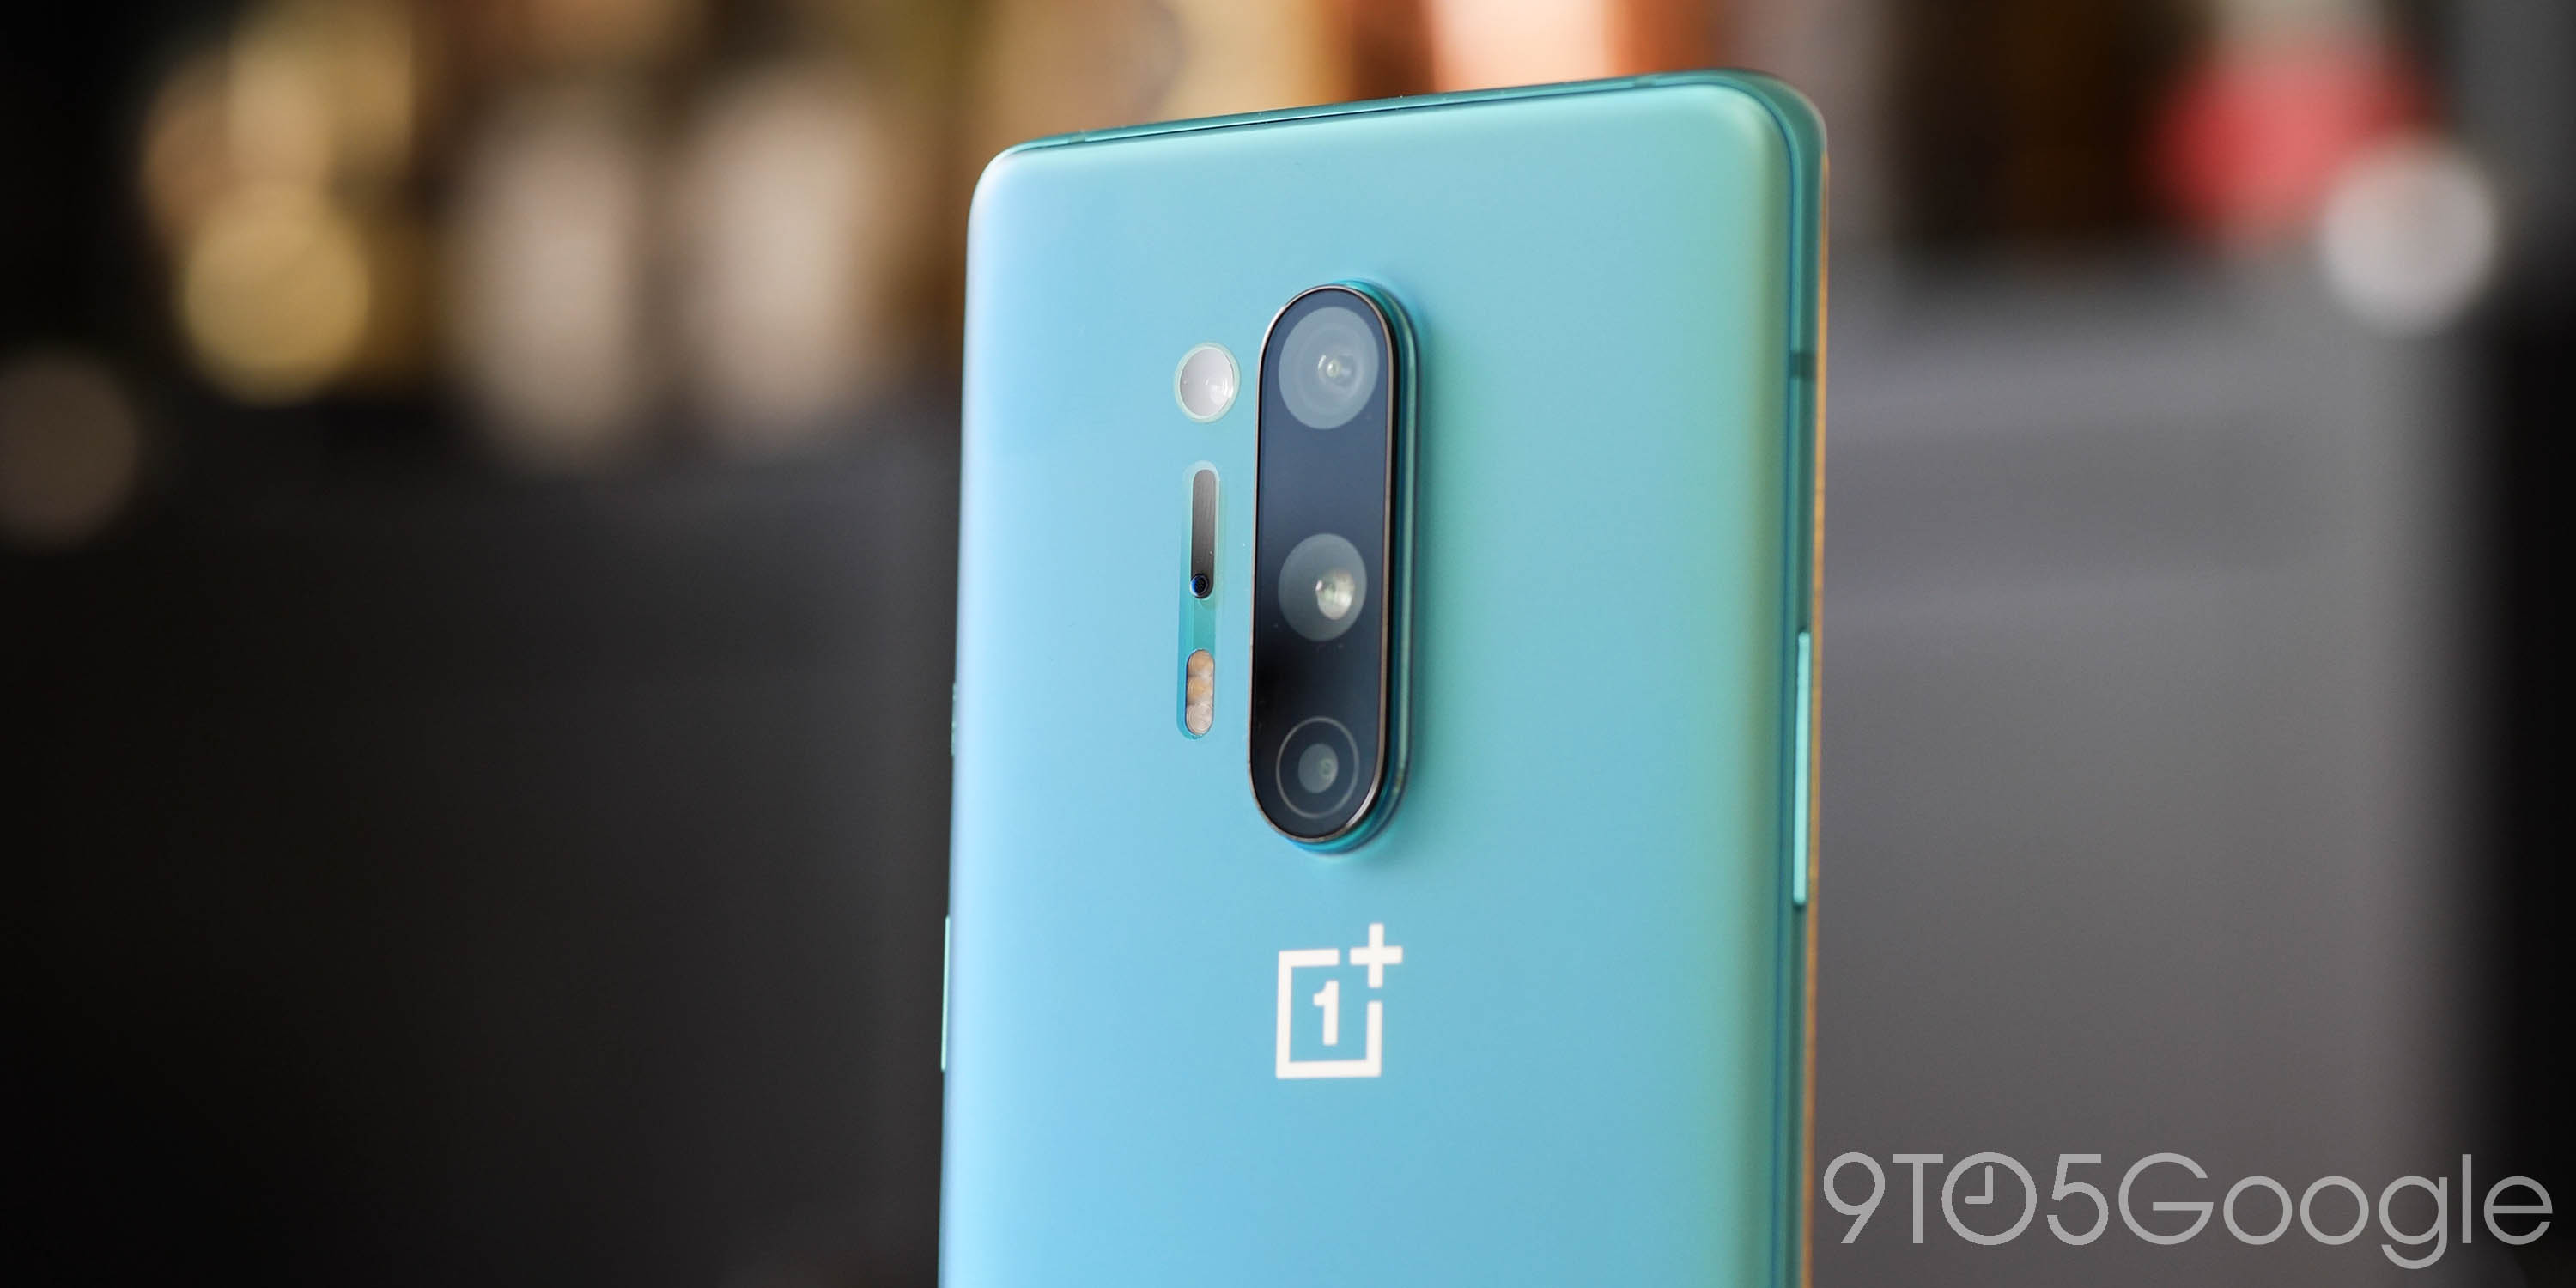 OnePlus 8 Pro is now receiving the February 2022 security patch with OxygenOS 11.0.11.11 which is rolling out right now.